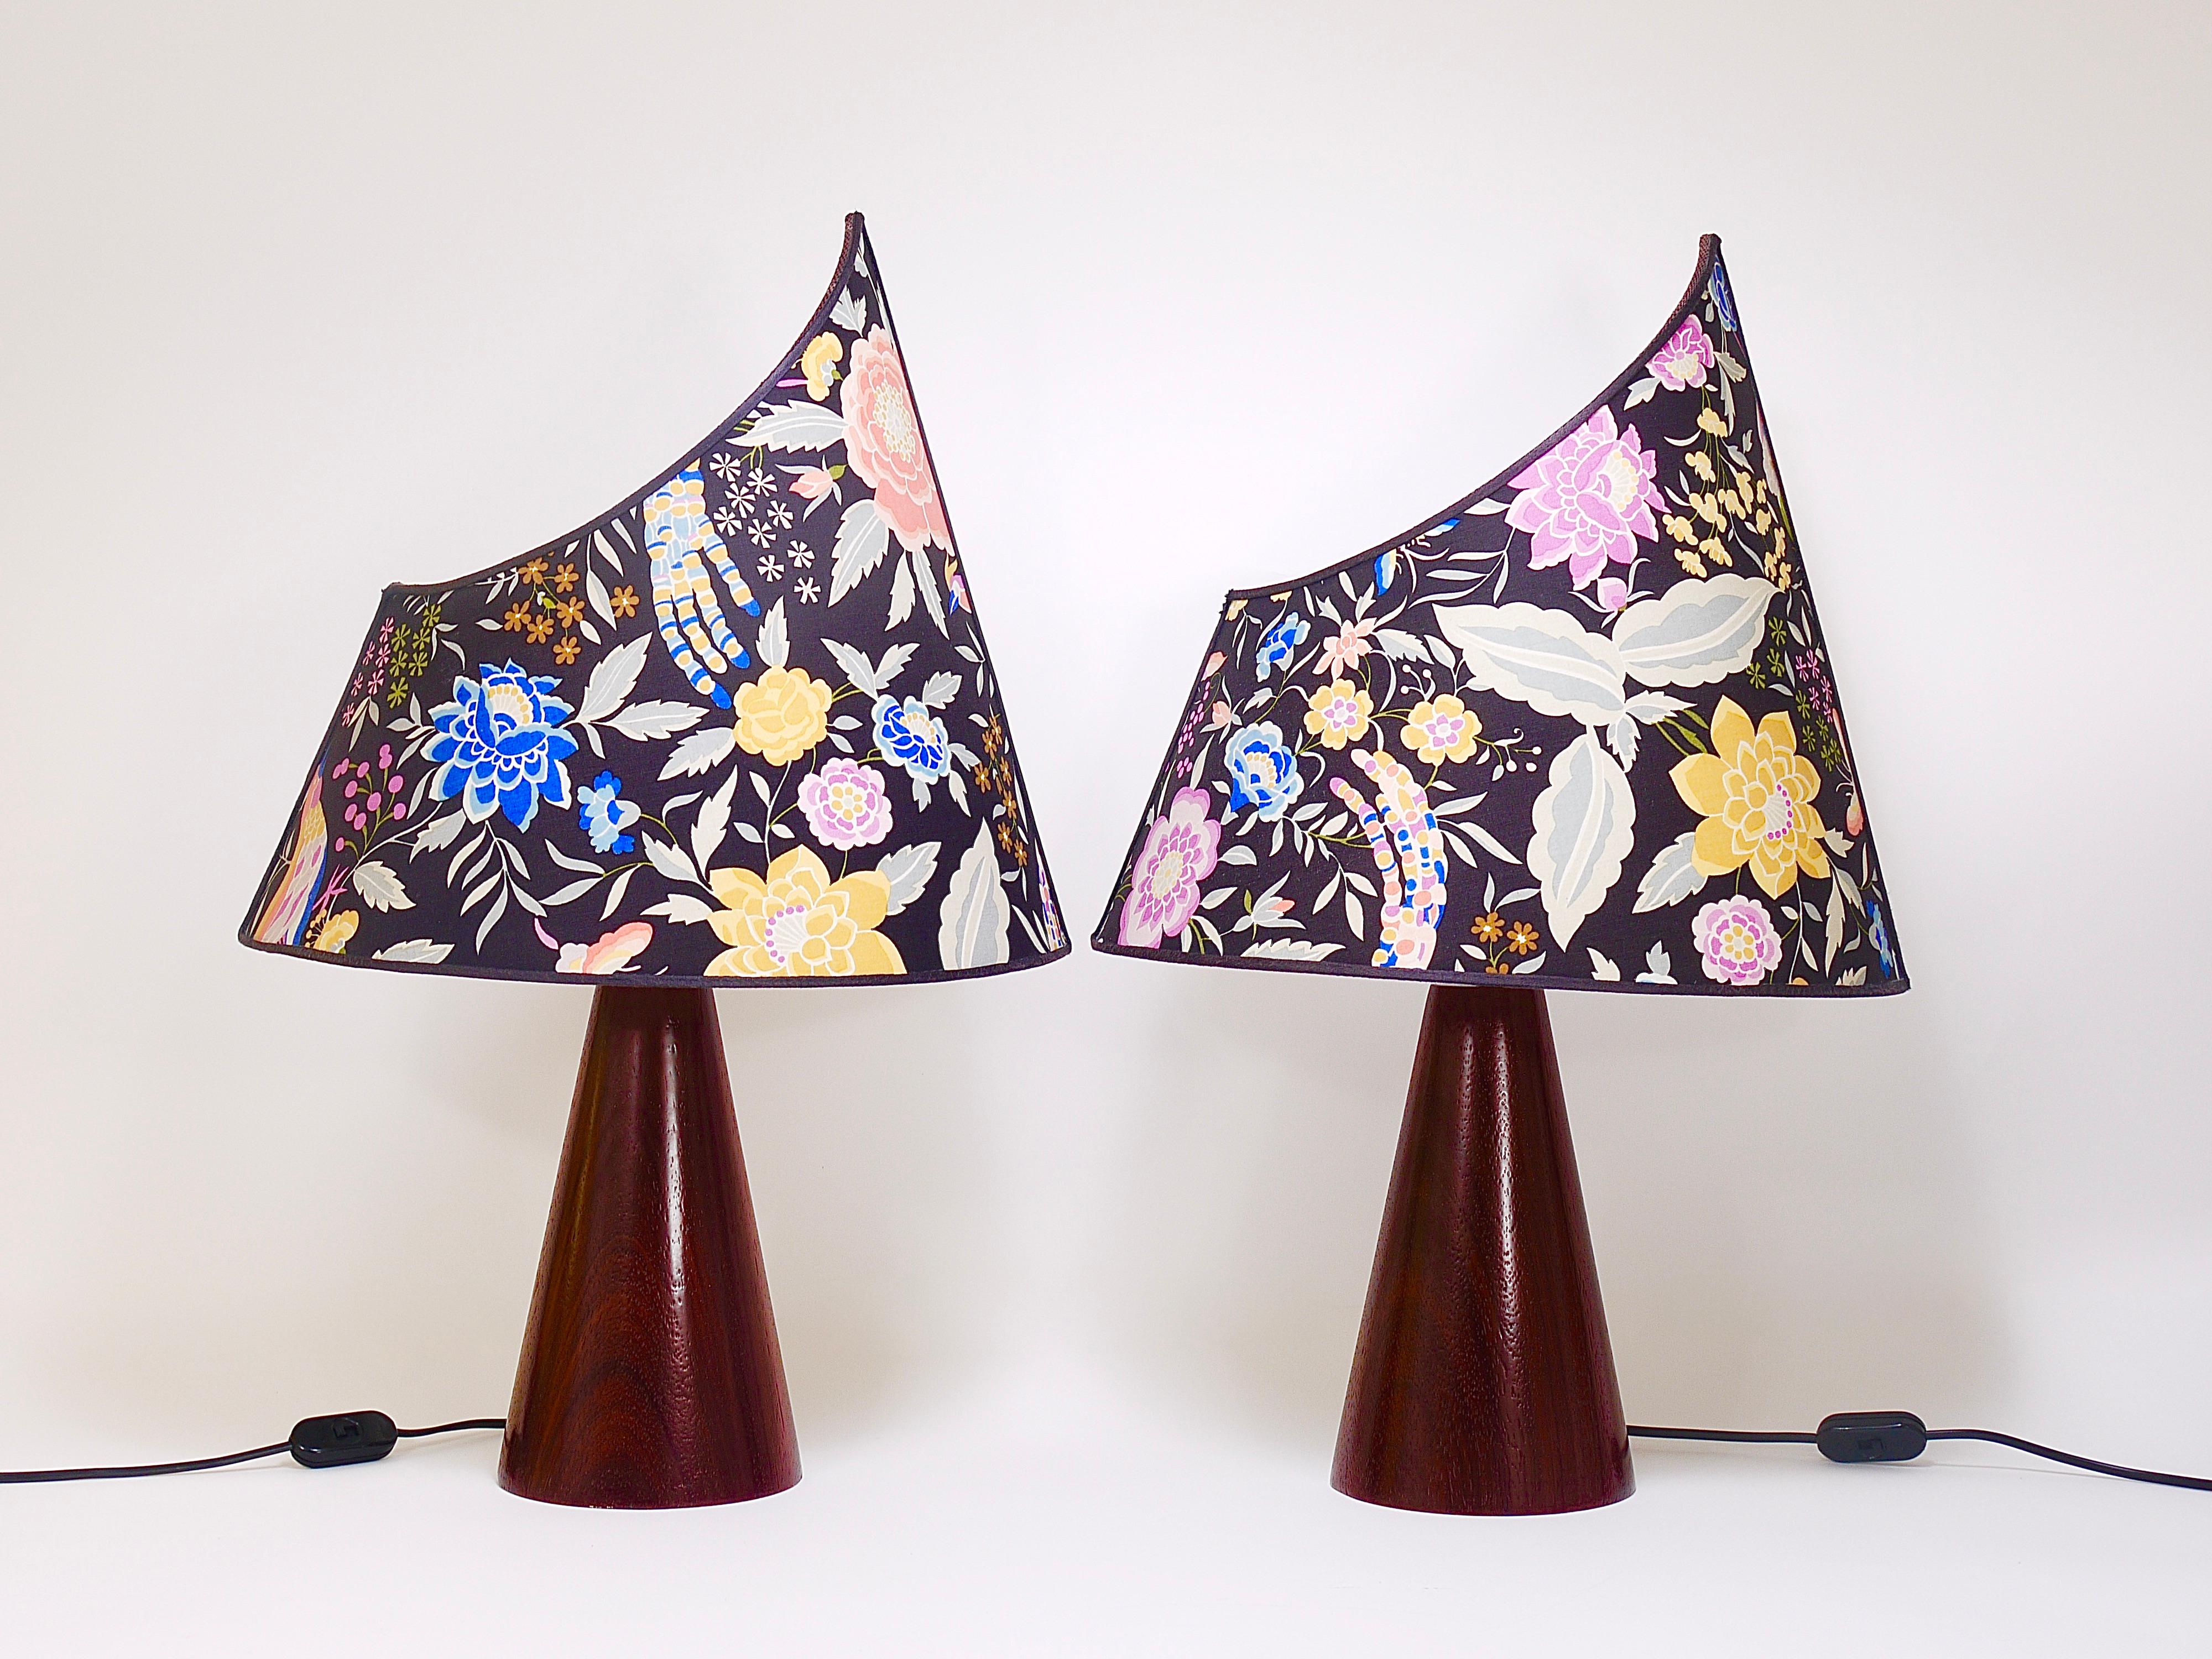 An amazing pair of colorful postmodern Missoni table or side lamps, nightstand lights from the 1980s, designed by Massimo Valloto. This light has an unusual conical base made of dark wood and an asymmetrical lampshade in the shape of a sail with a